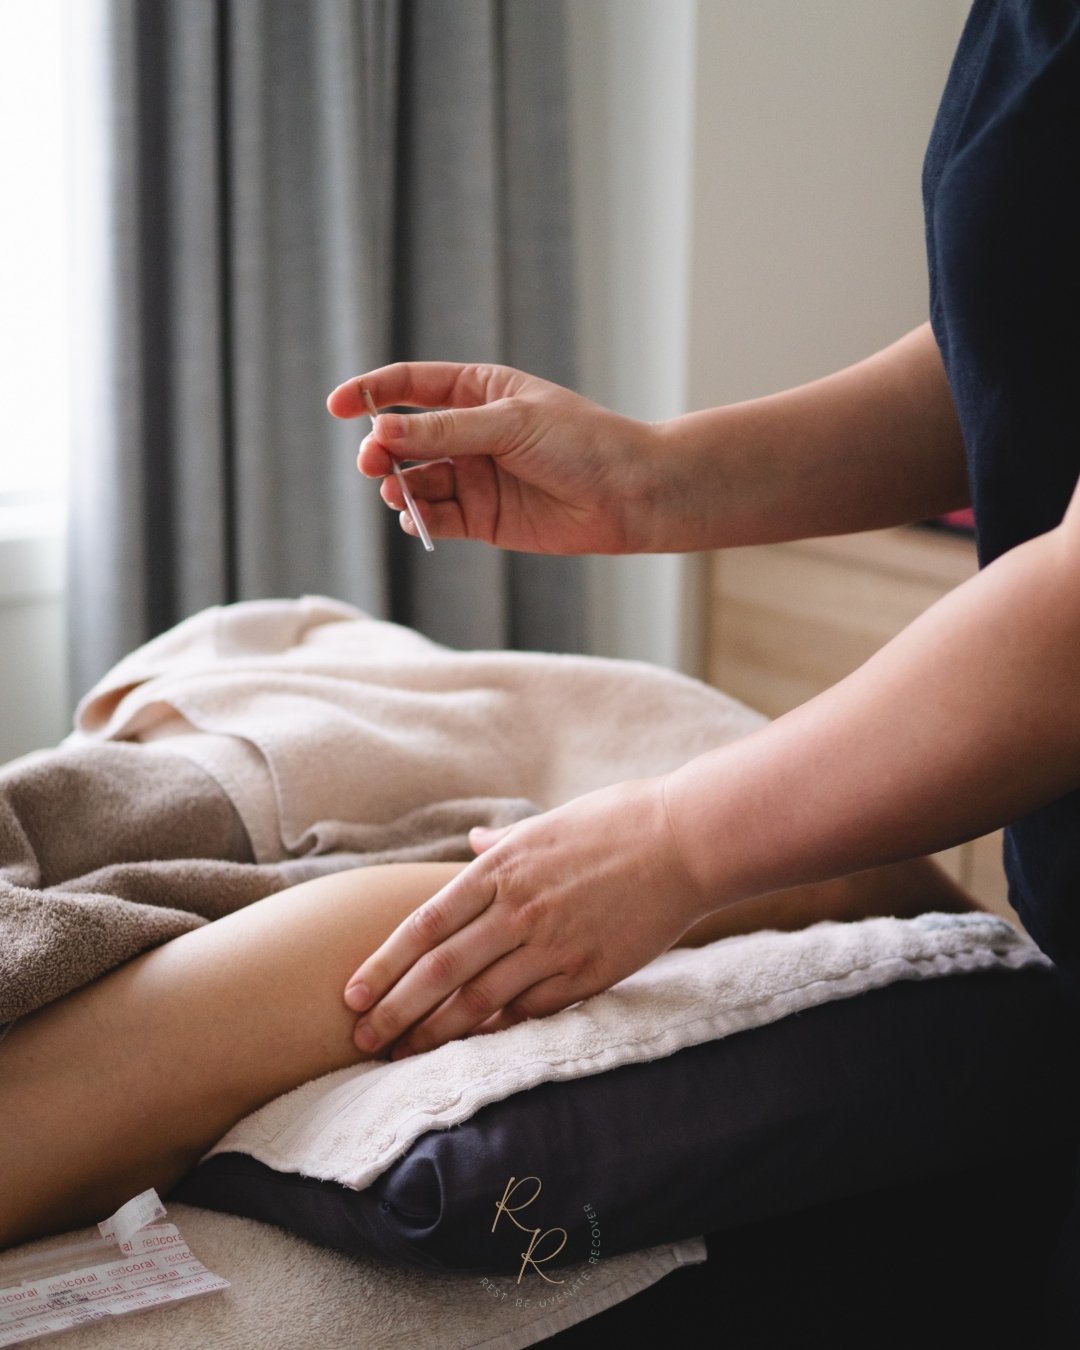 Why we're hooked on dry needling.

Your therapist skilfully employs thin filament needles to target myofascial trigger points, muscles, and connective tissues.

Why we love it:
✔️ Pain relief that hits the spot
✔️ Reduced muscle tension and inflammat